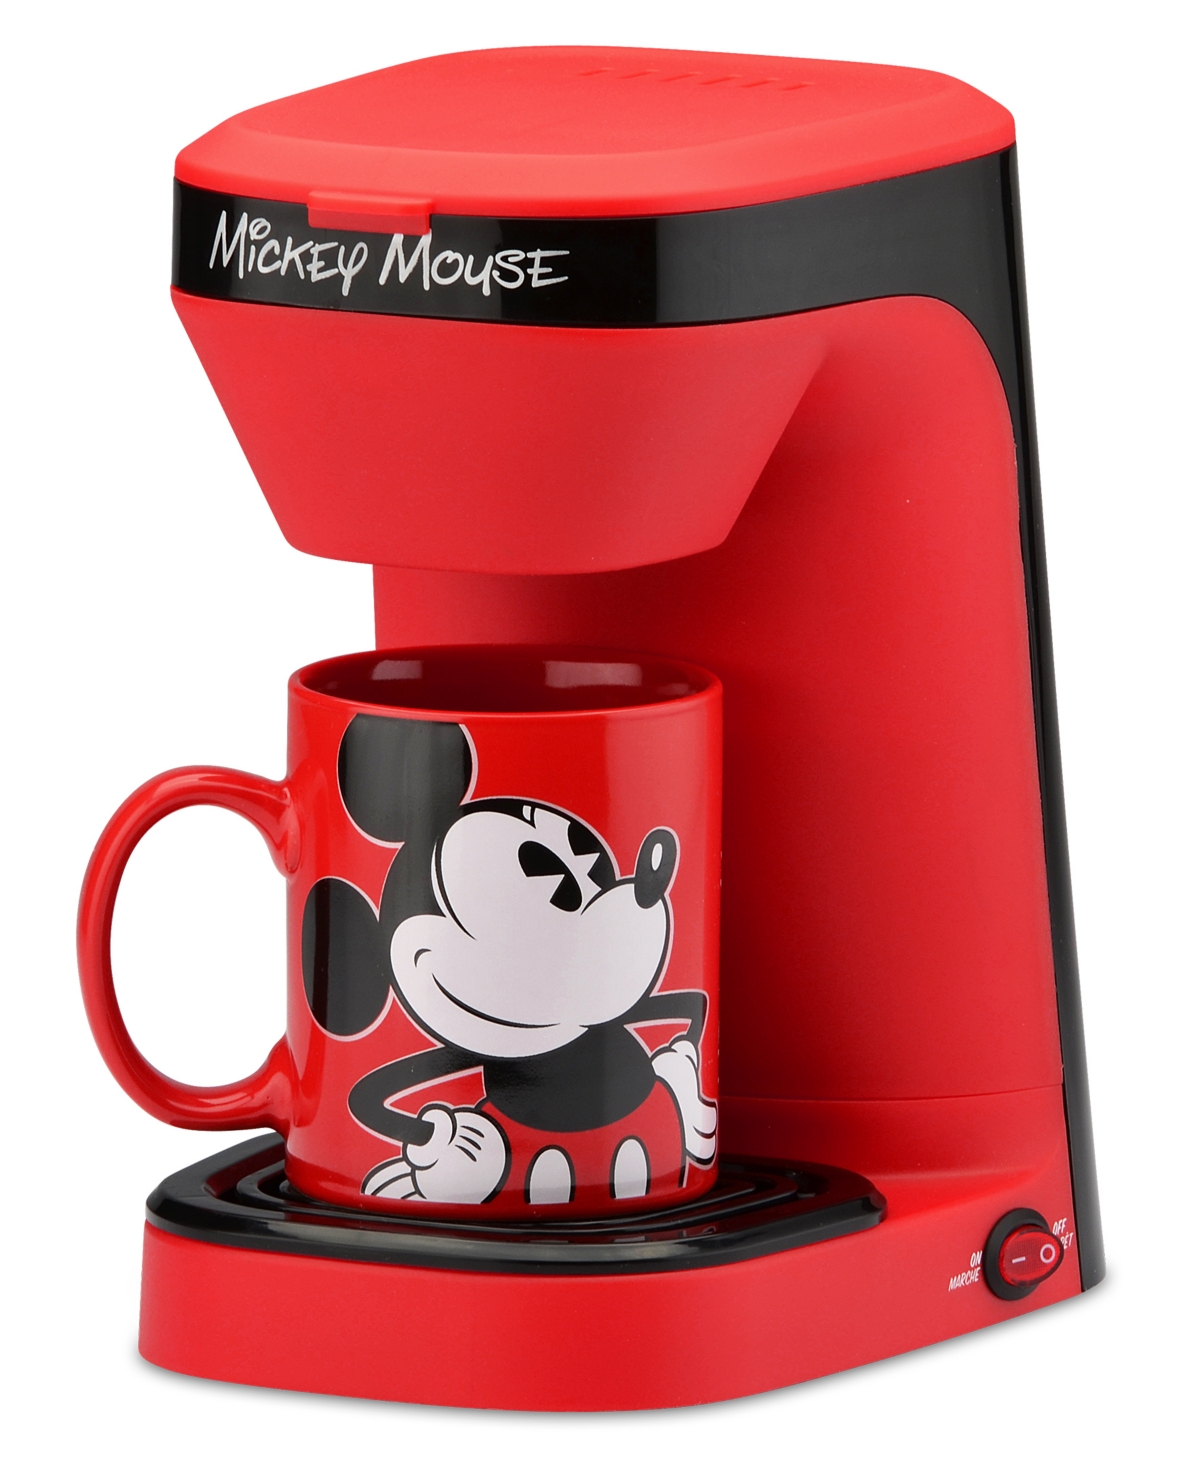 Disney Mickey Mouse 1-cup Coffee Maker In Red